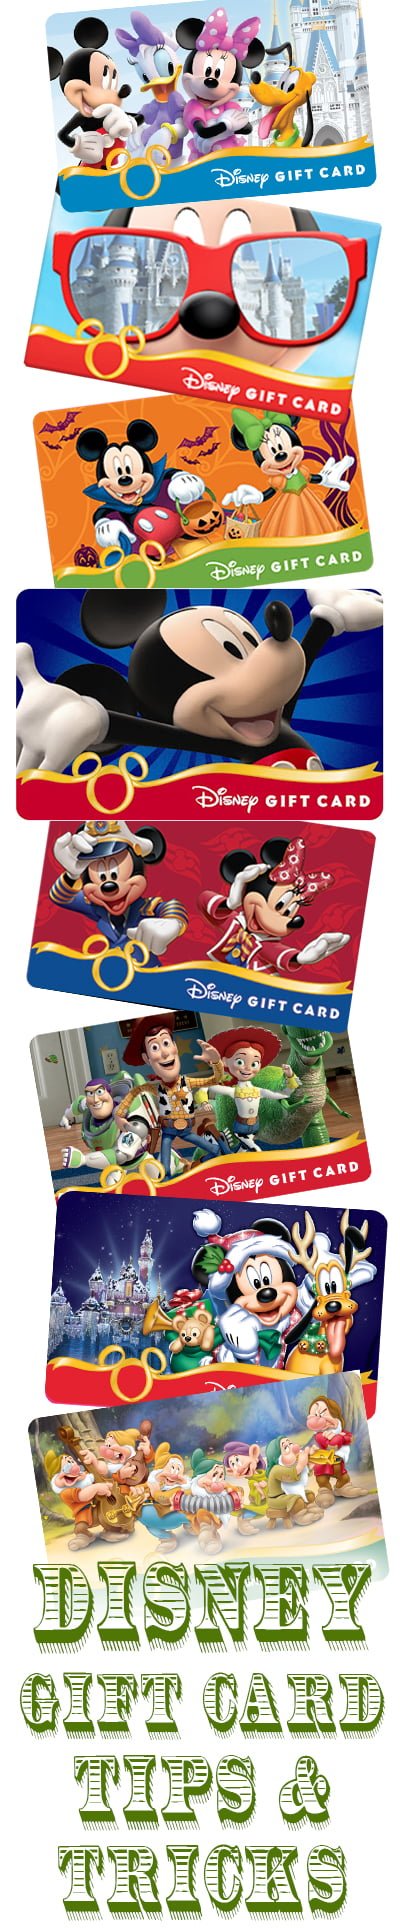 What are some tips for purchasing discounted Disney World tickets?